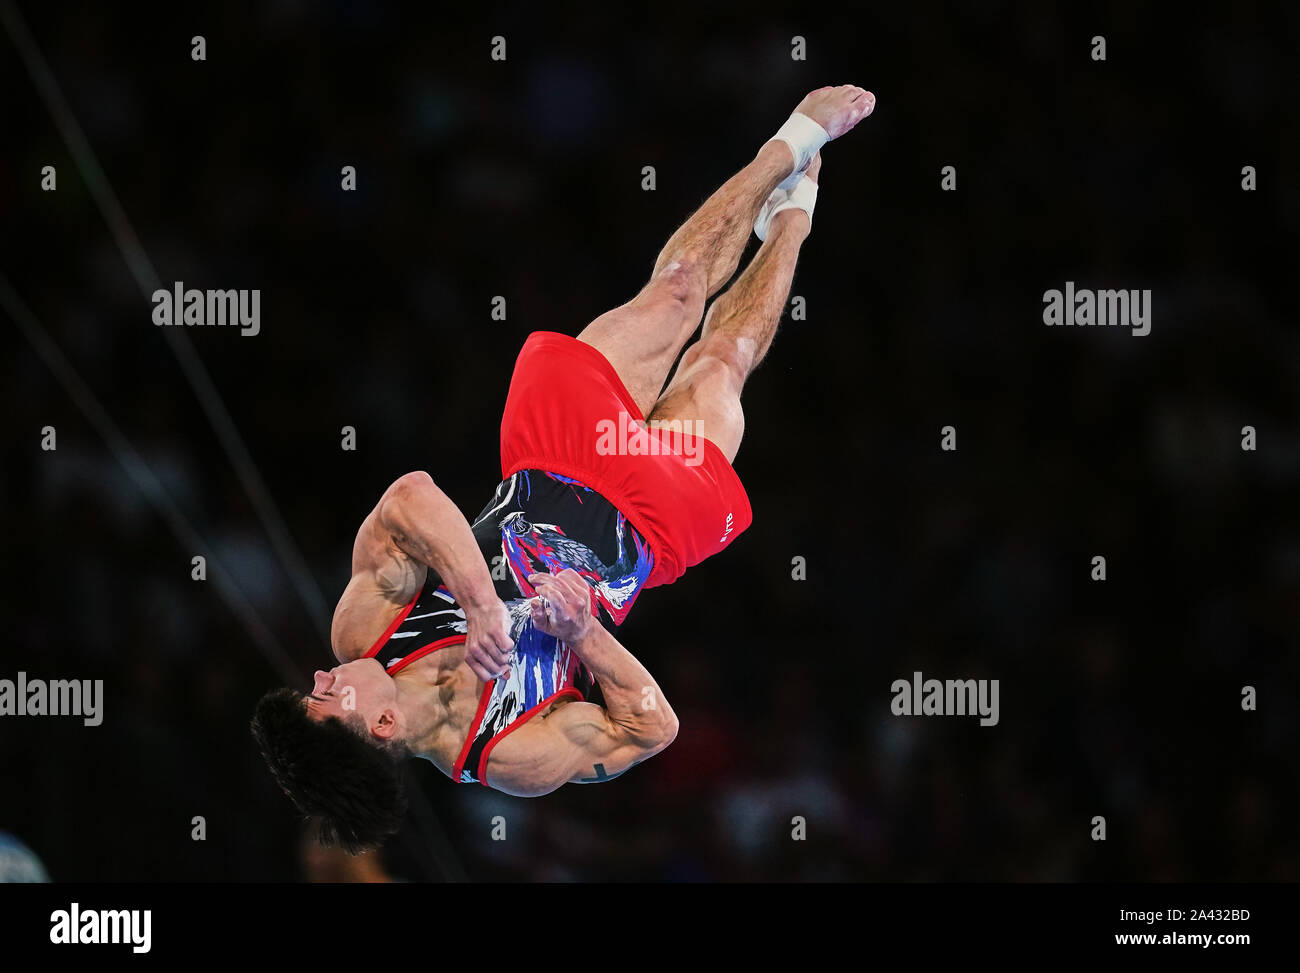 October 11, 2019: Artur Dalaloyan of Russia competing in floor exercise for  men during the 49th FIG Artistic Gymnastics World Championships at the  Hanns Martin Schleyer Halle in Stuttgart, Germany. Ulrik Pedersen/CSM